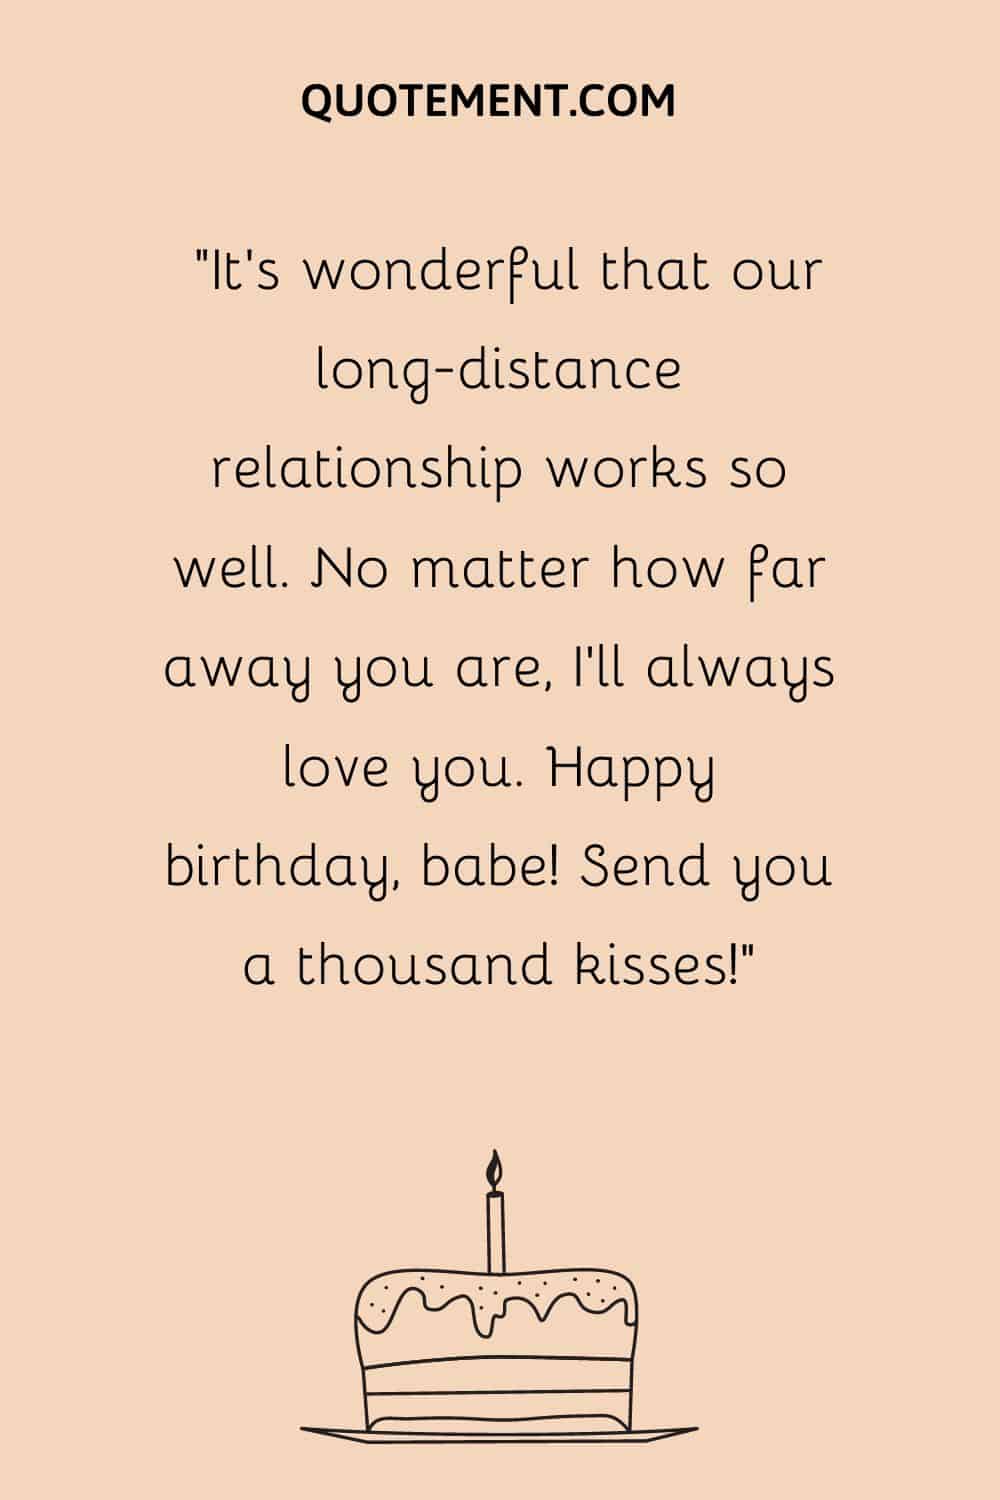 “It’s wonderful that our long-distance relationship works so well. No matter how far away you are, I’ll always love you. Happy birthday, babe! Send you a thousand kisses!”